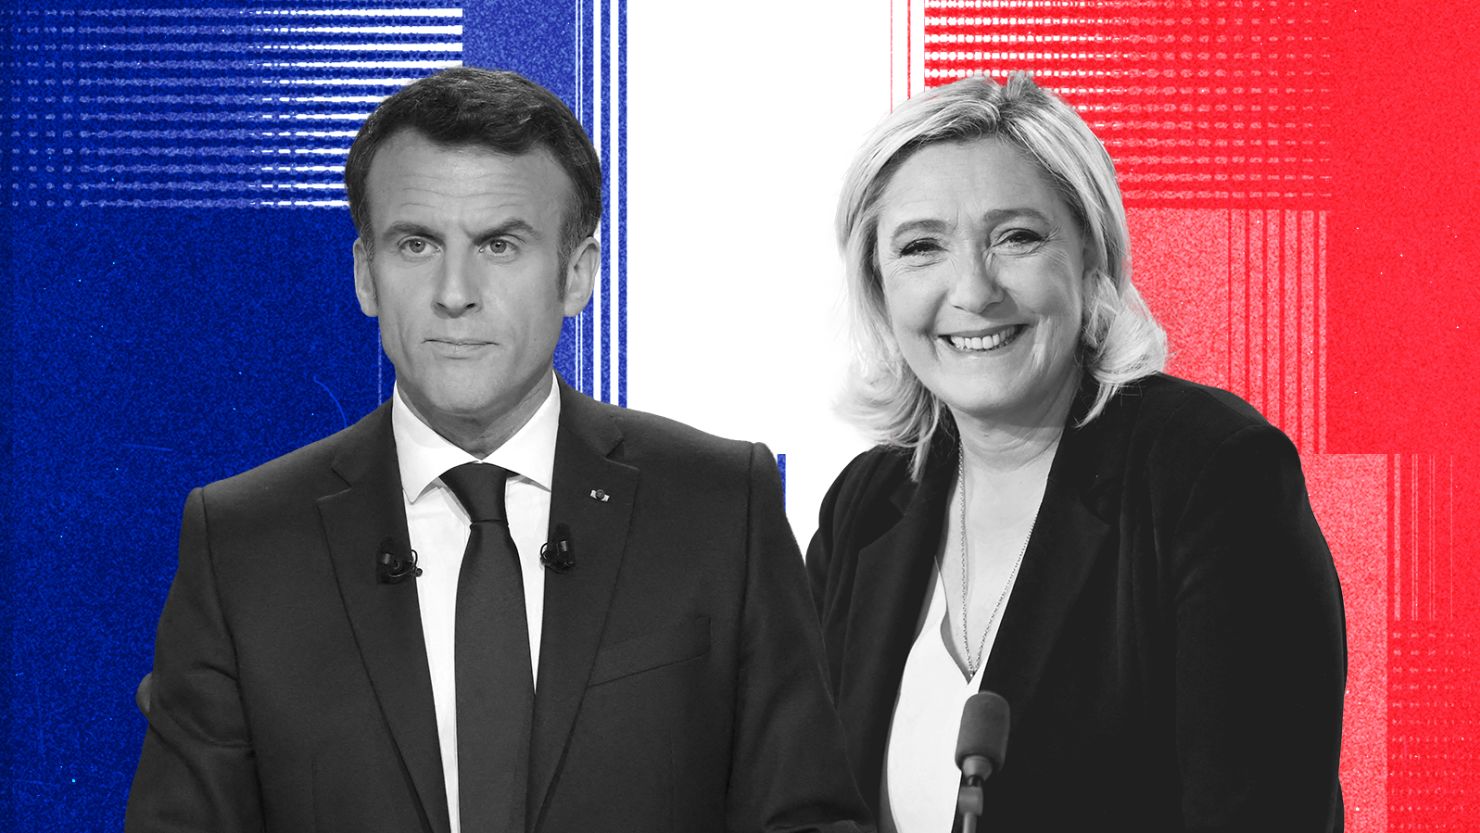 Macron to Face LePen in French Presidential Run-Offs